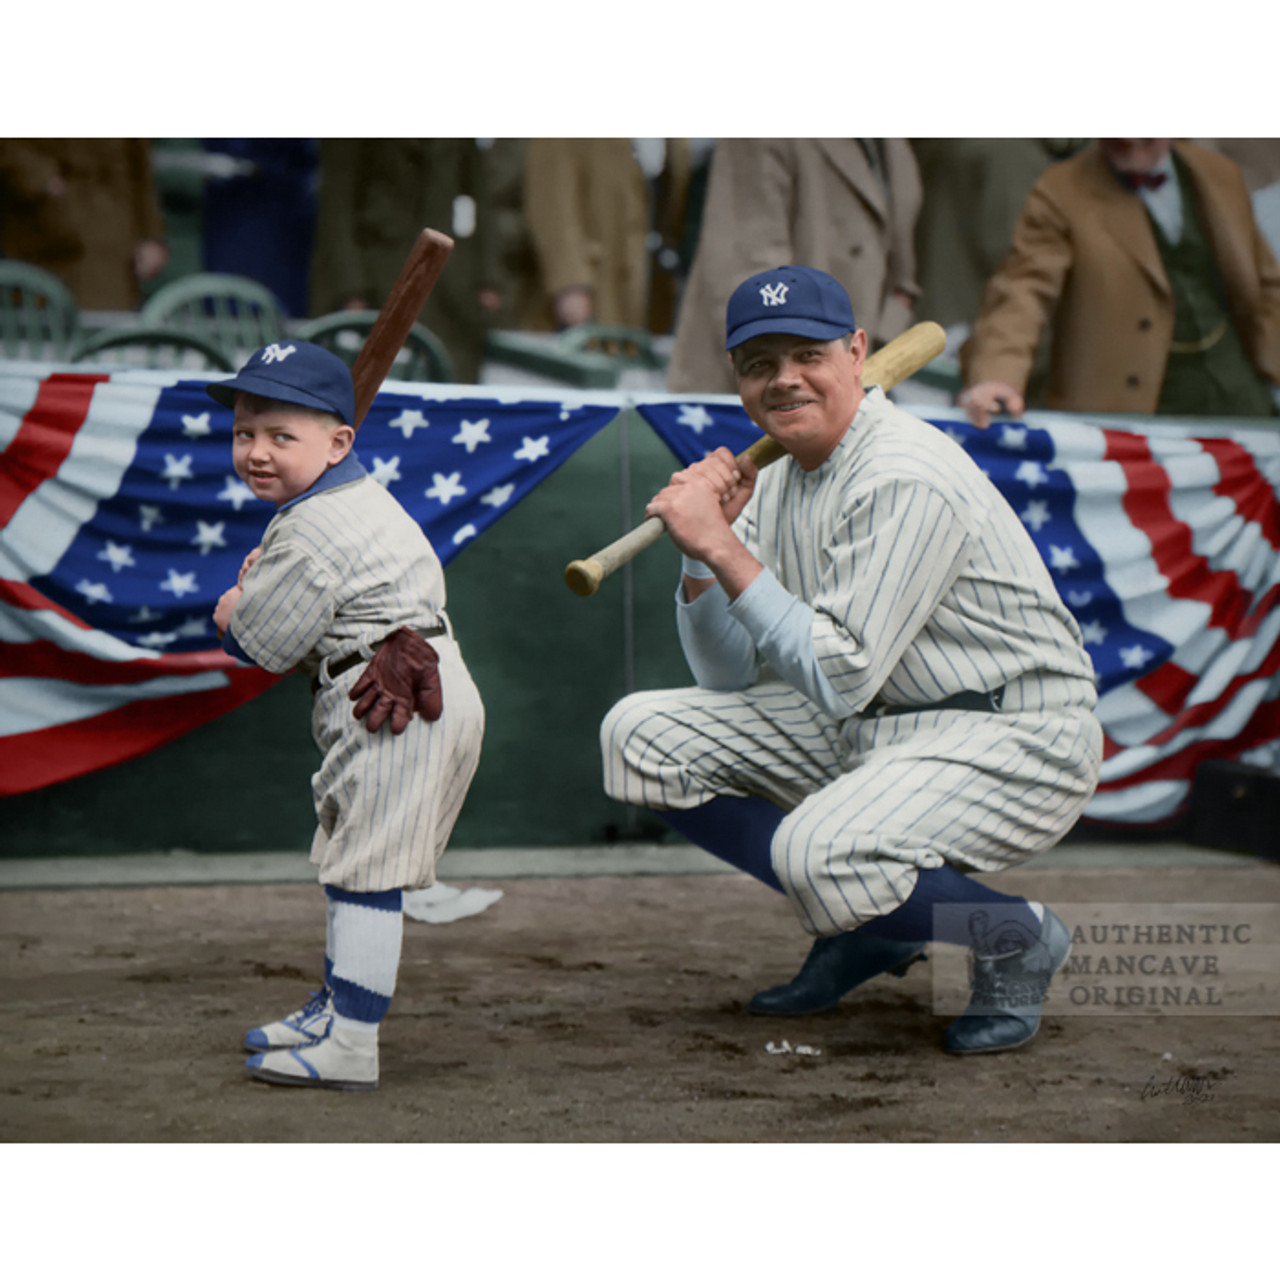 Colorized photo of Lou Gehrig and Babe Ruth from 1927 at League Park in  Cleveland : r/baseball